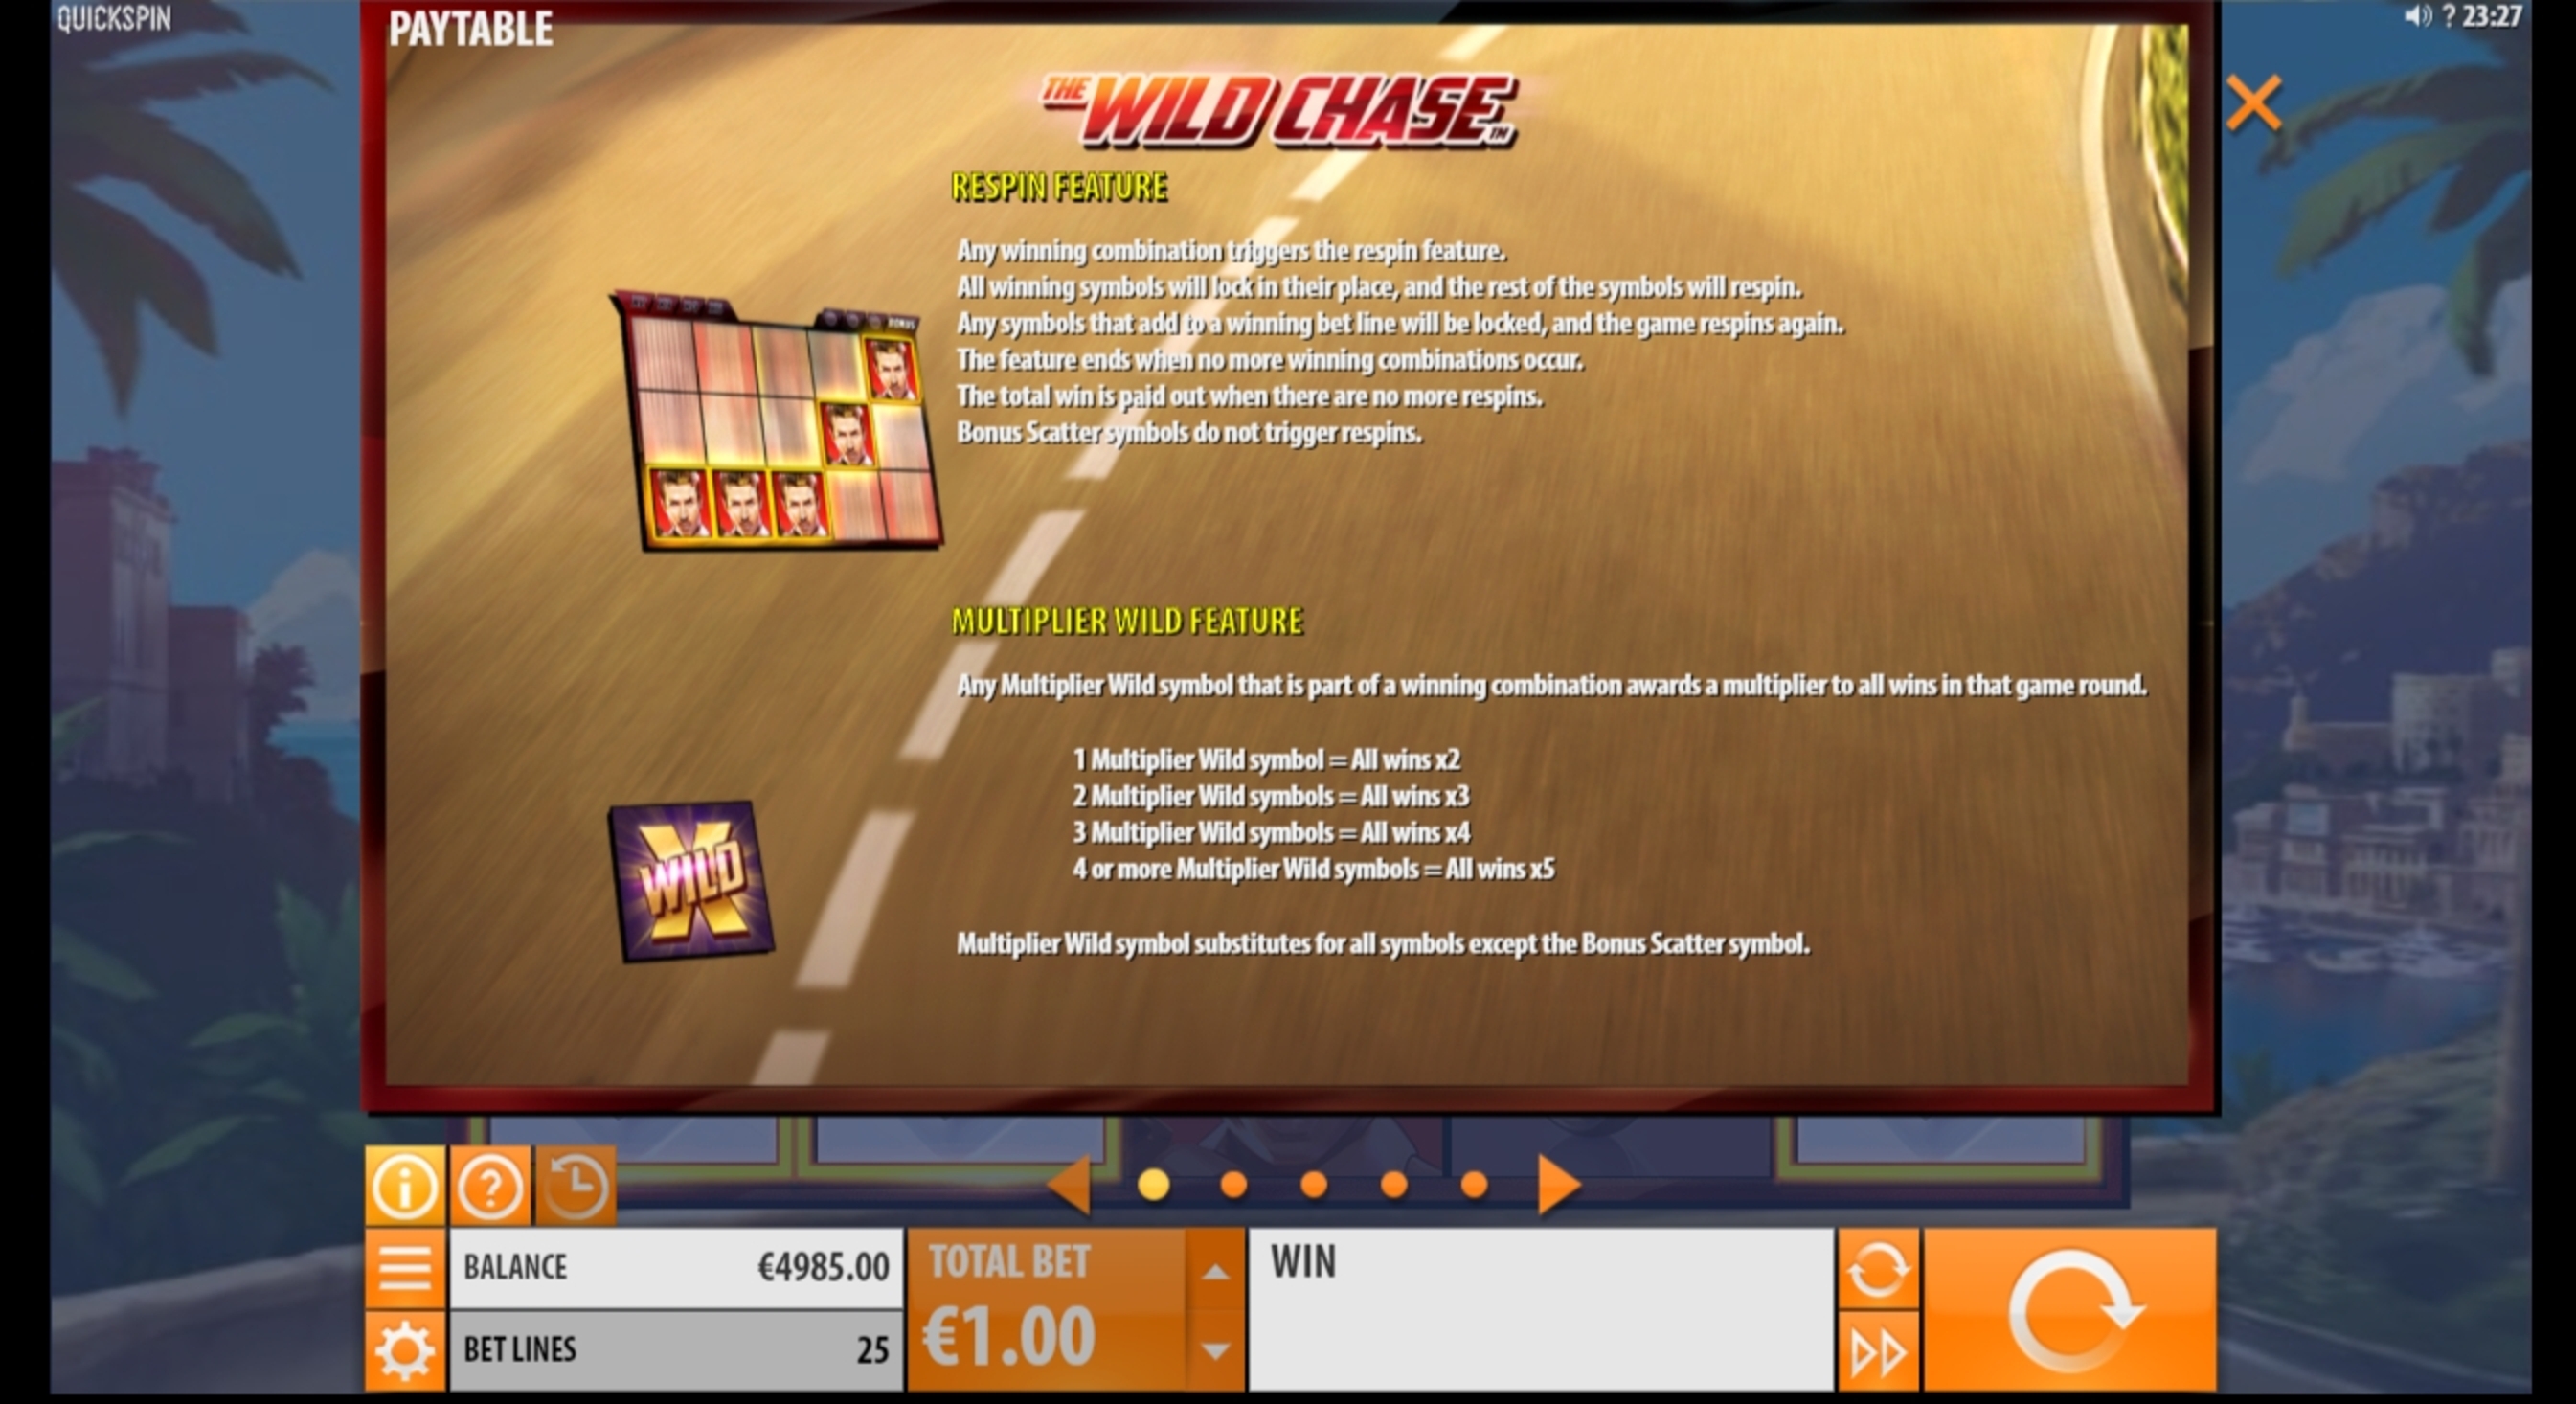 Info of The Wild Chase Slot Game by Quickspin